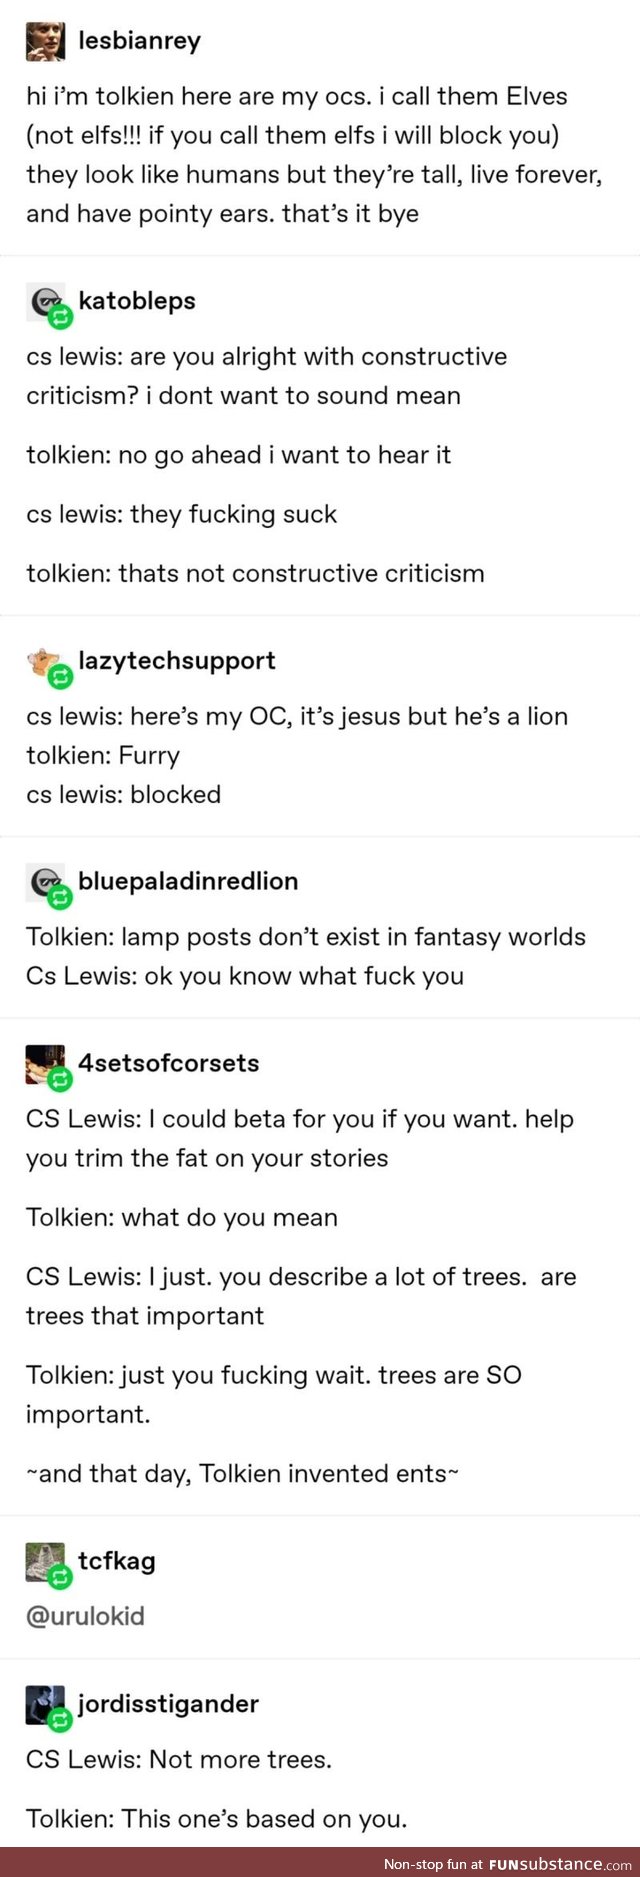 C.S. Lewis and J.R.R. Tolkien